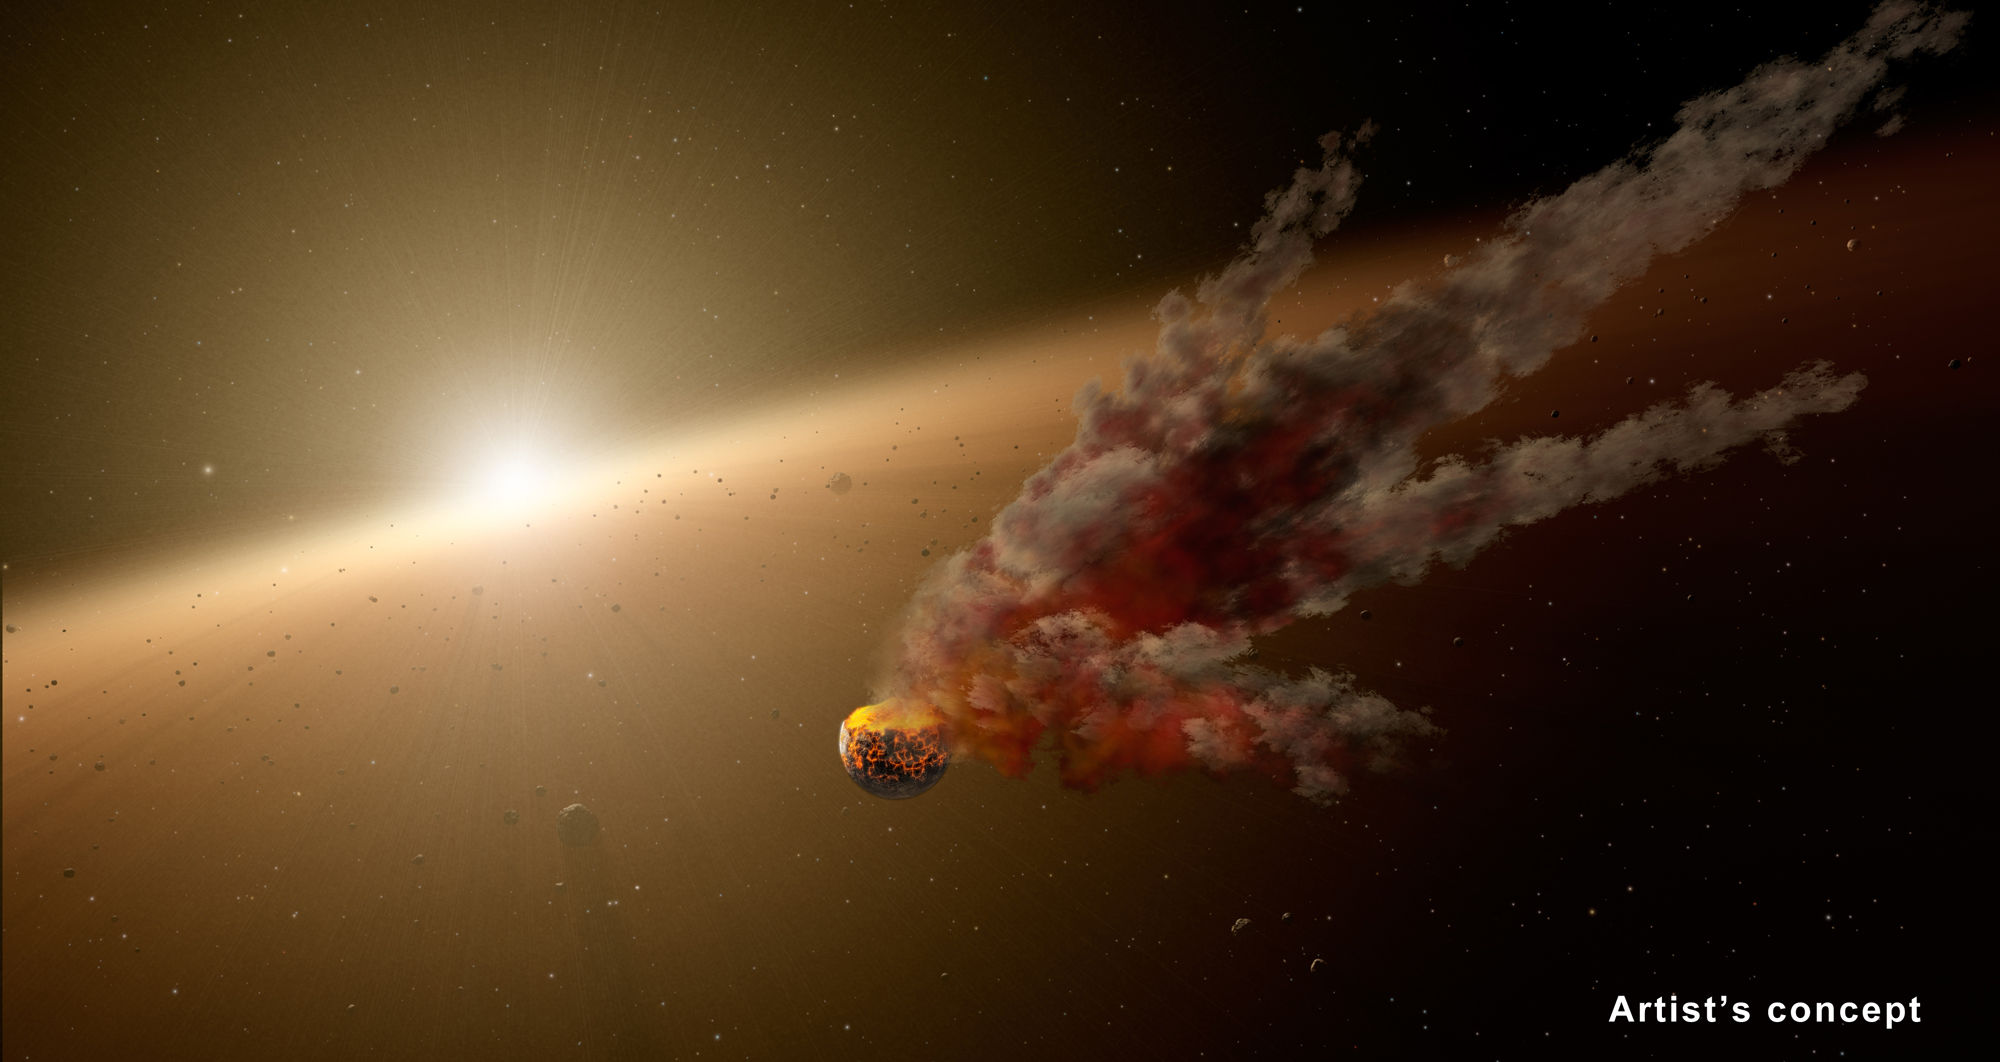 Artist’s illustration of a planetesimal collision in a young star system. Credit: NASA/JPL-Caltech